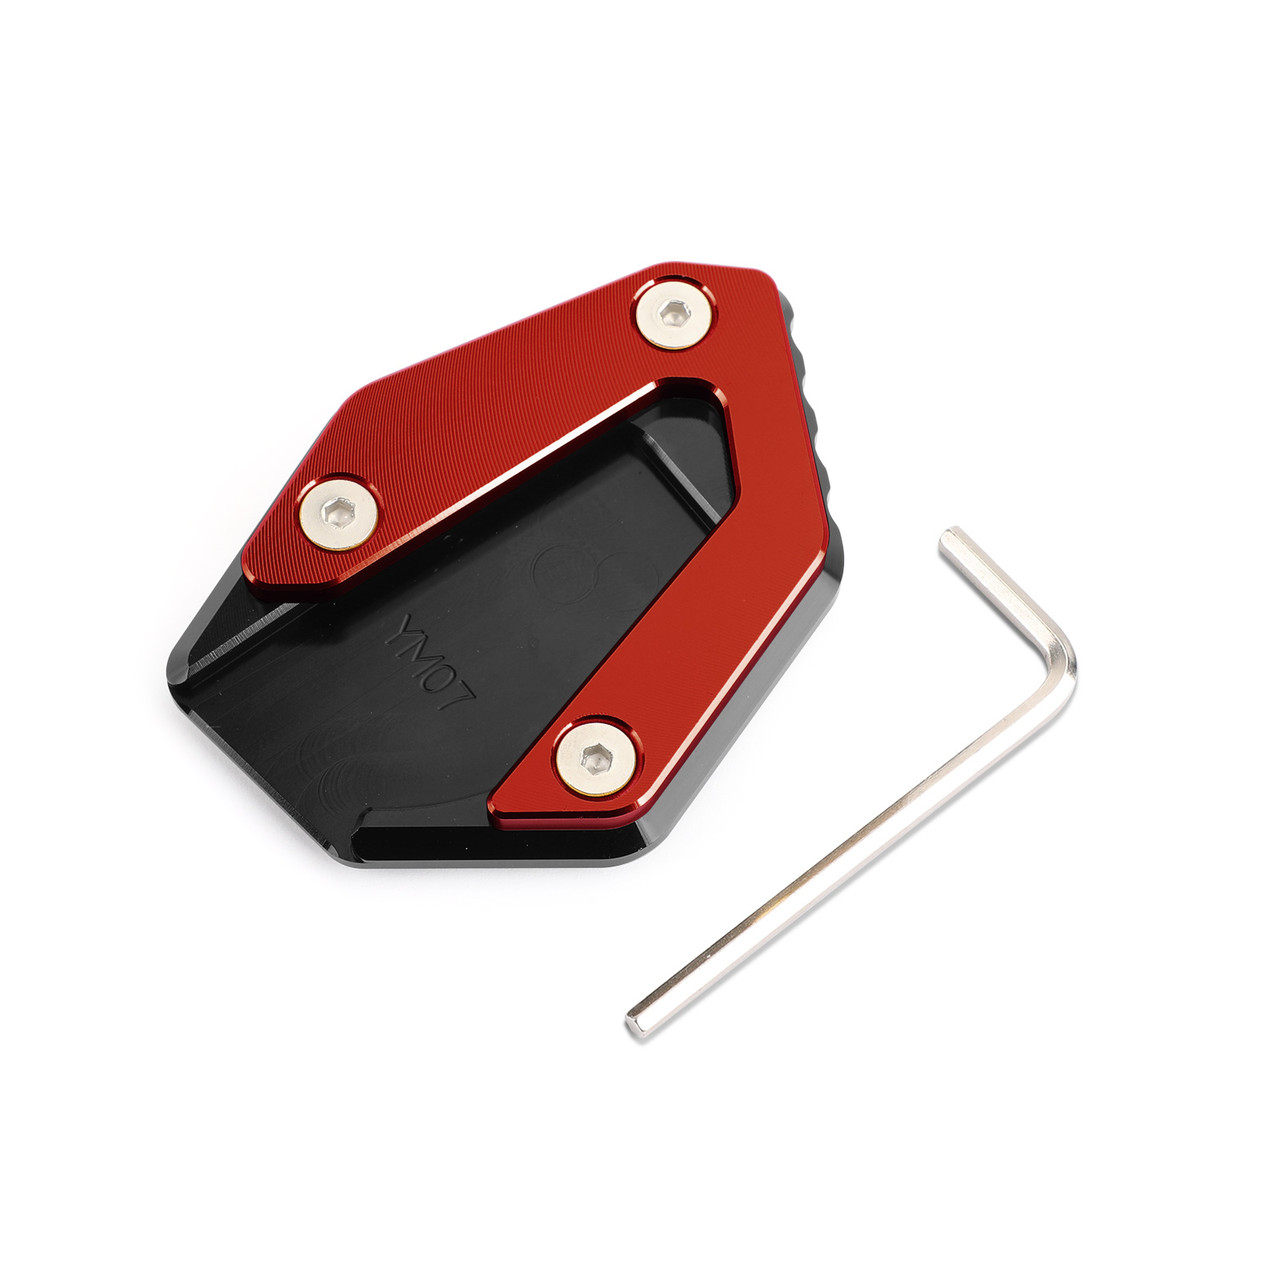 Kickstand Side Stand Extension Pad For YAMAHA MT-07 FZ-07 TRACER 700 14-19 Red